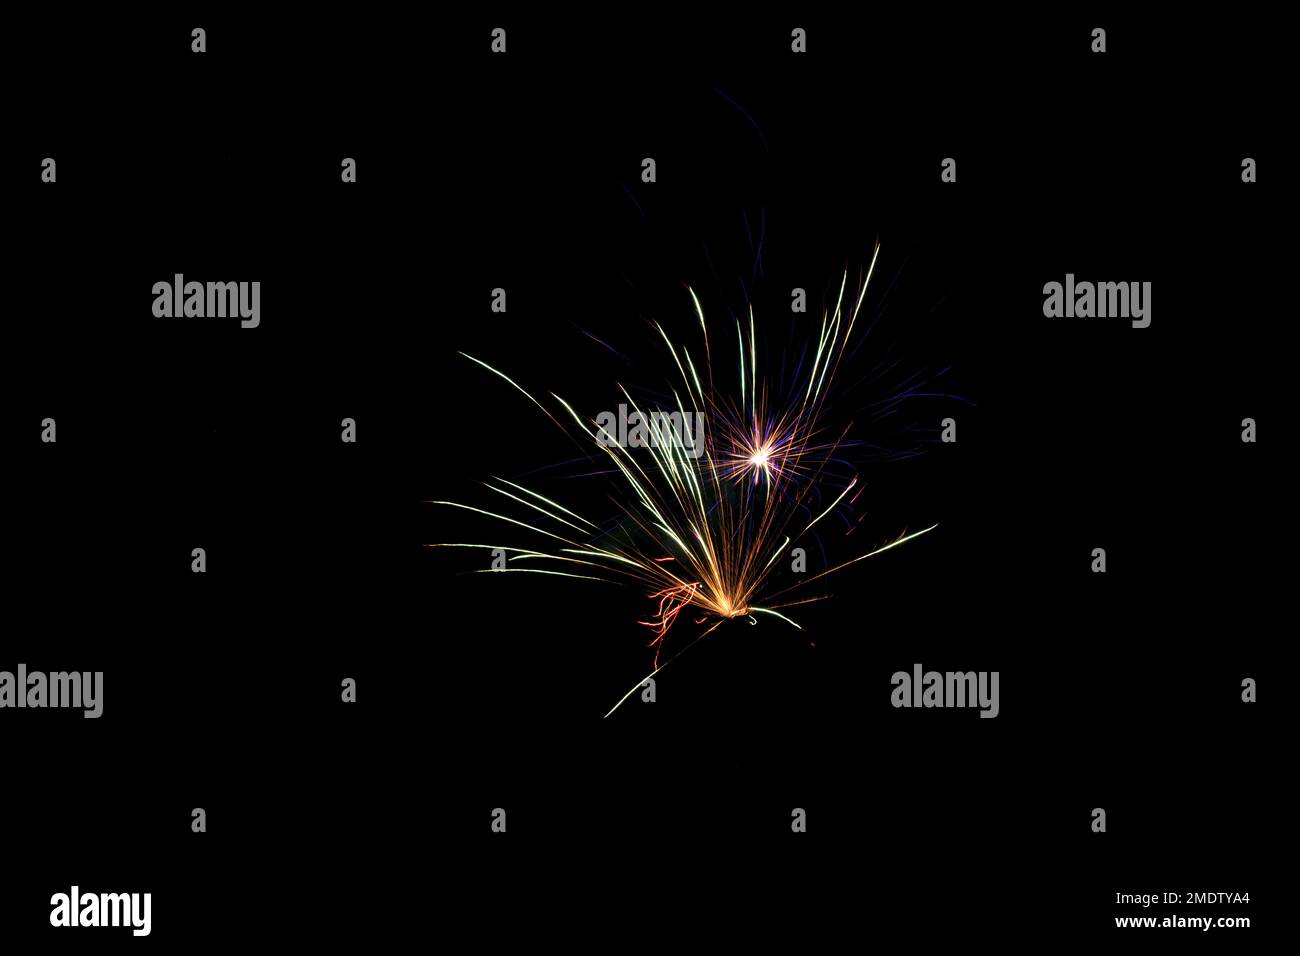 Real fireworks photography and abstract colorful fireworks background Stock Photo